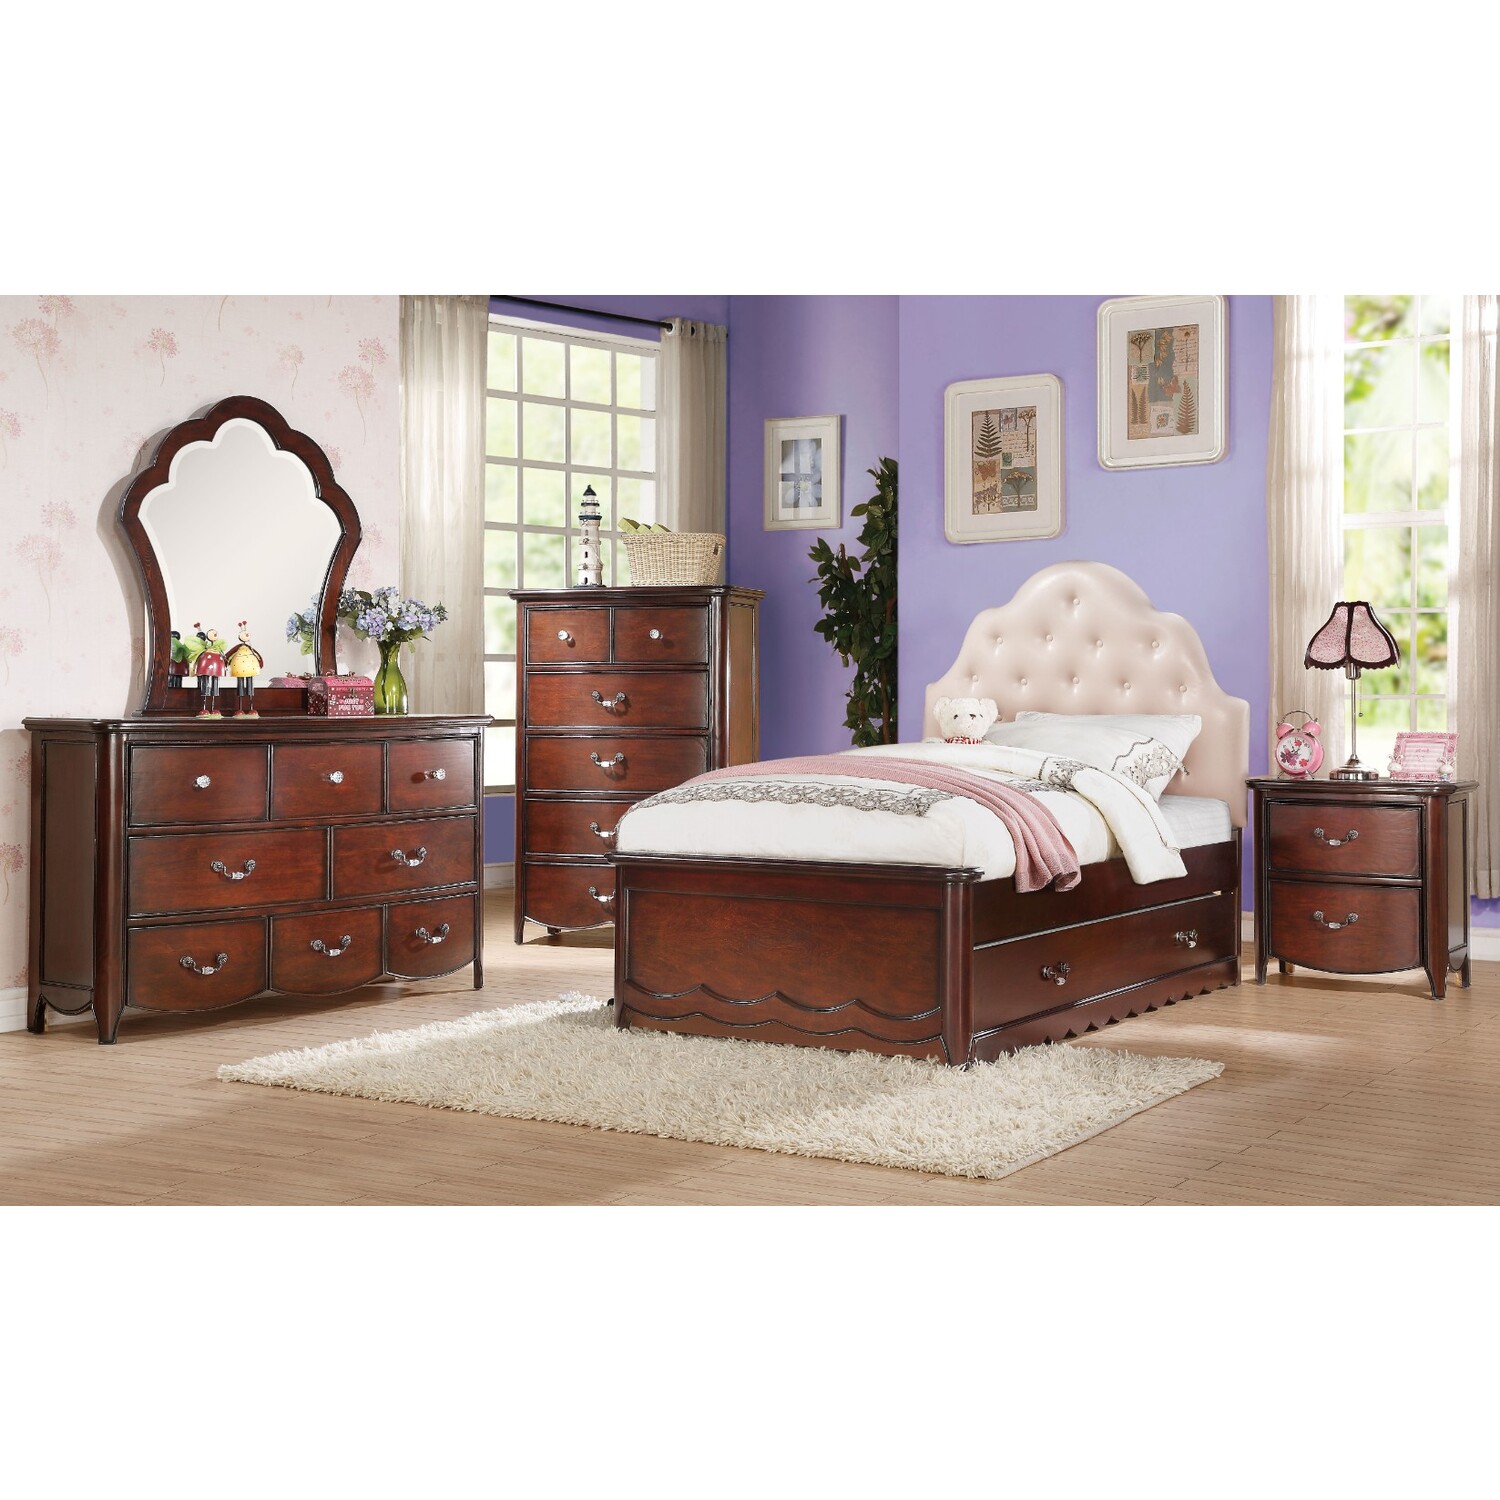 Benzara Majestic Twin Bed with Padded Headboard - image 1 of 1